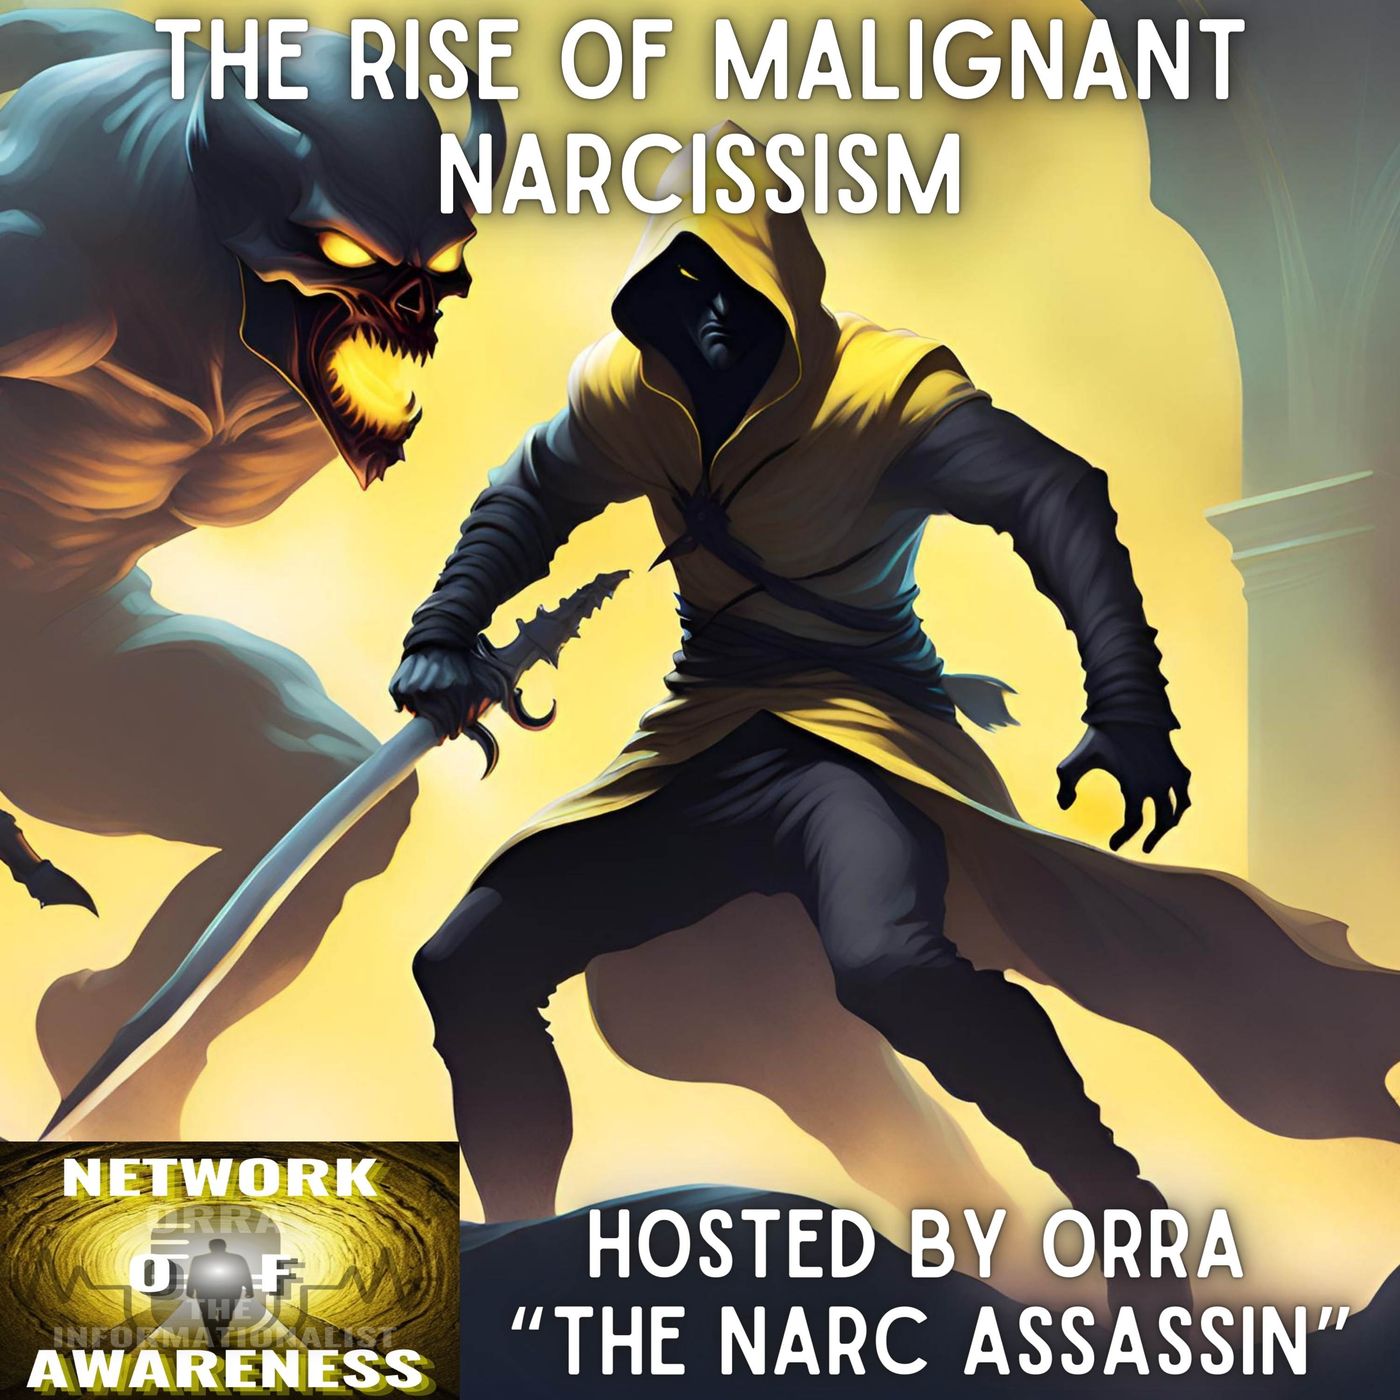 "The Rise of Malignant Narcissism"